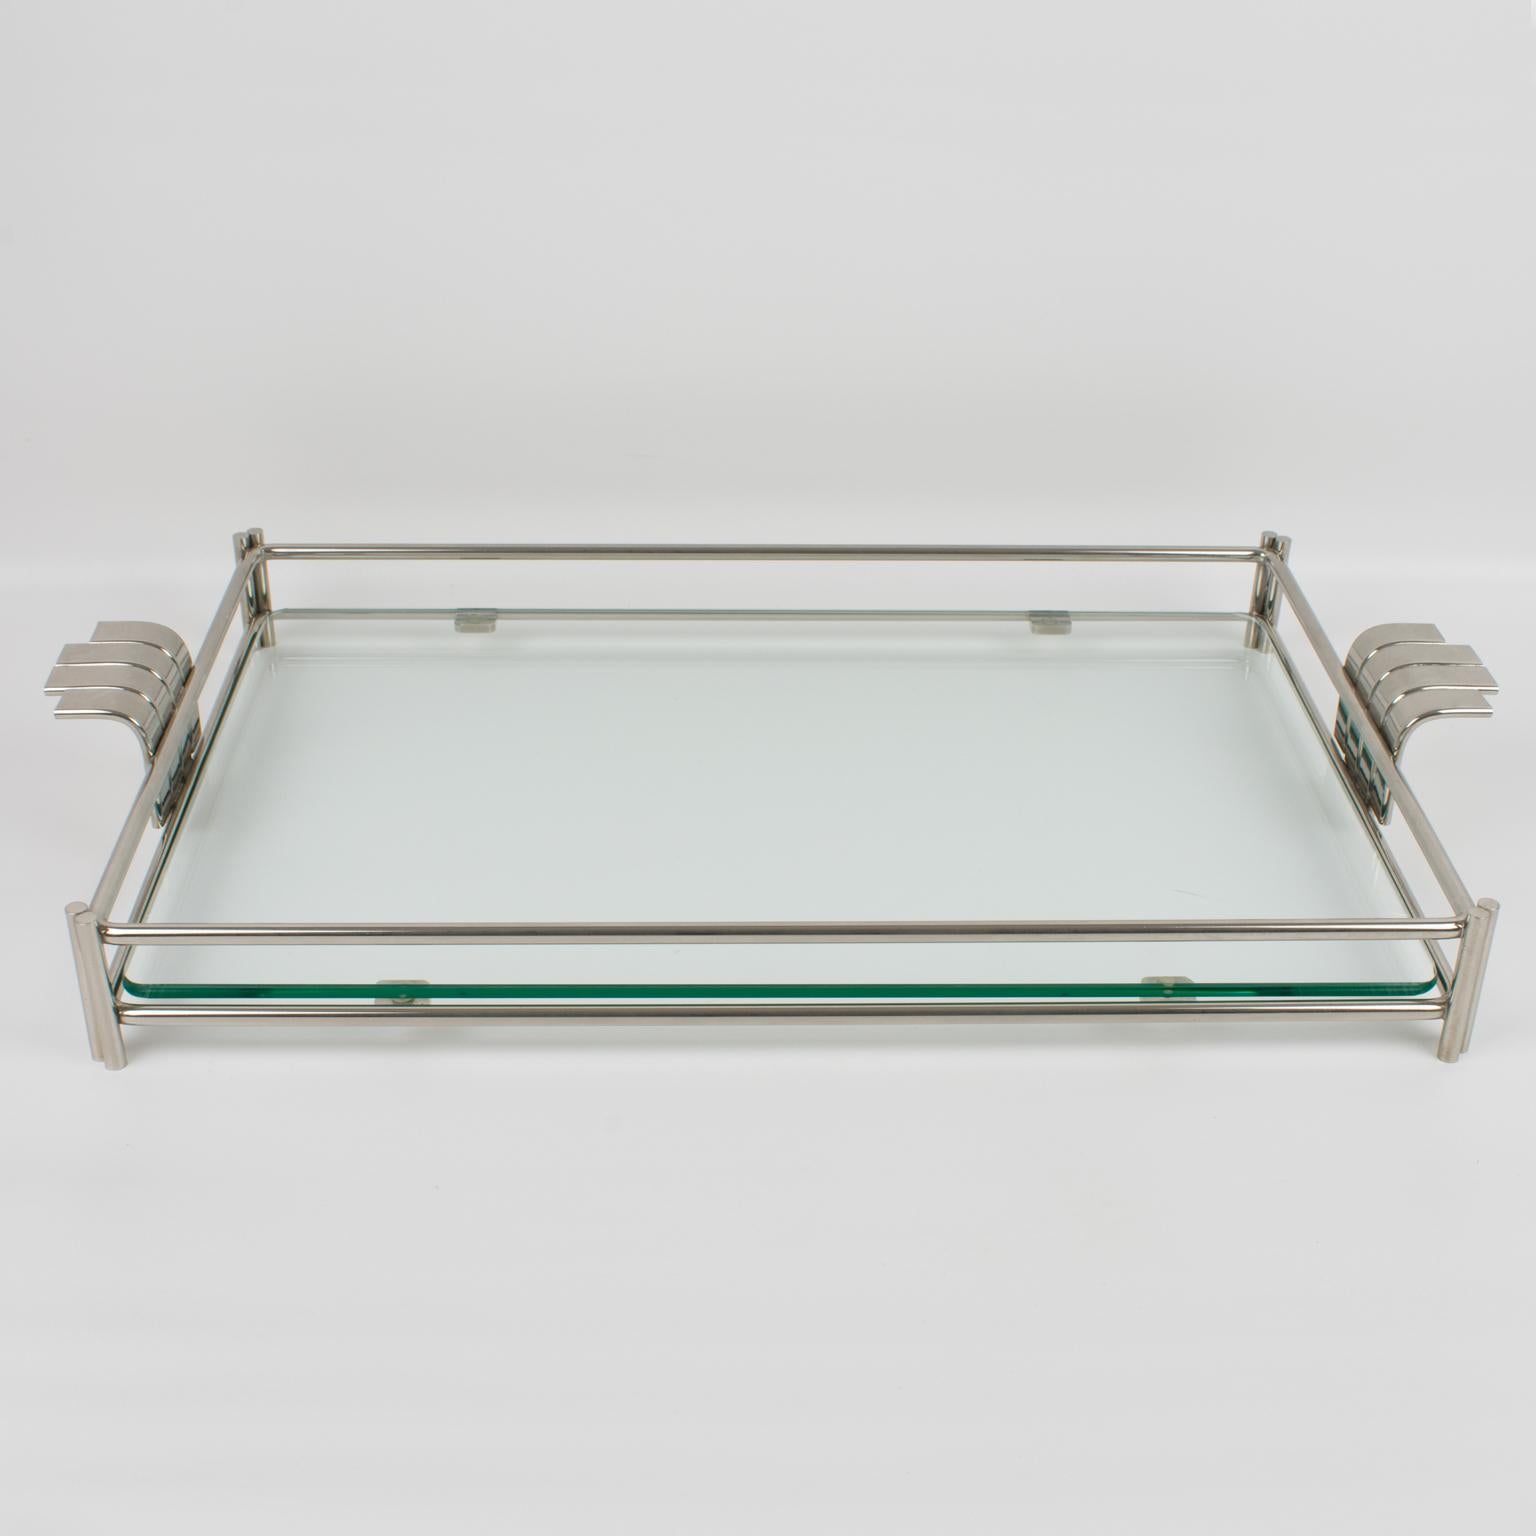 This sophisticated modernist barware serving tray platter was designed for the Christian Dior Home Collection in the 1980s. The large rectangular butler shape is built with silvered metal framing and a thick glass slab insert. The tray is